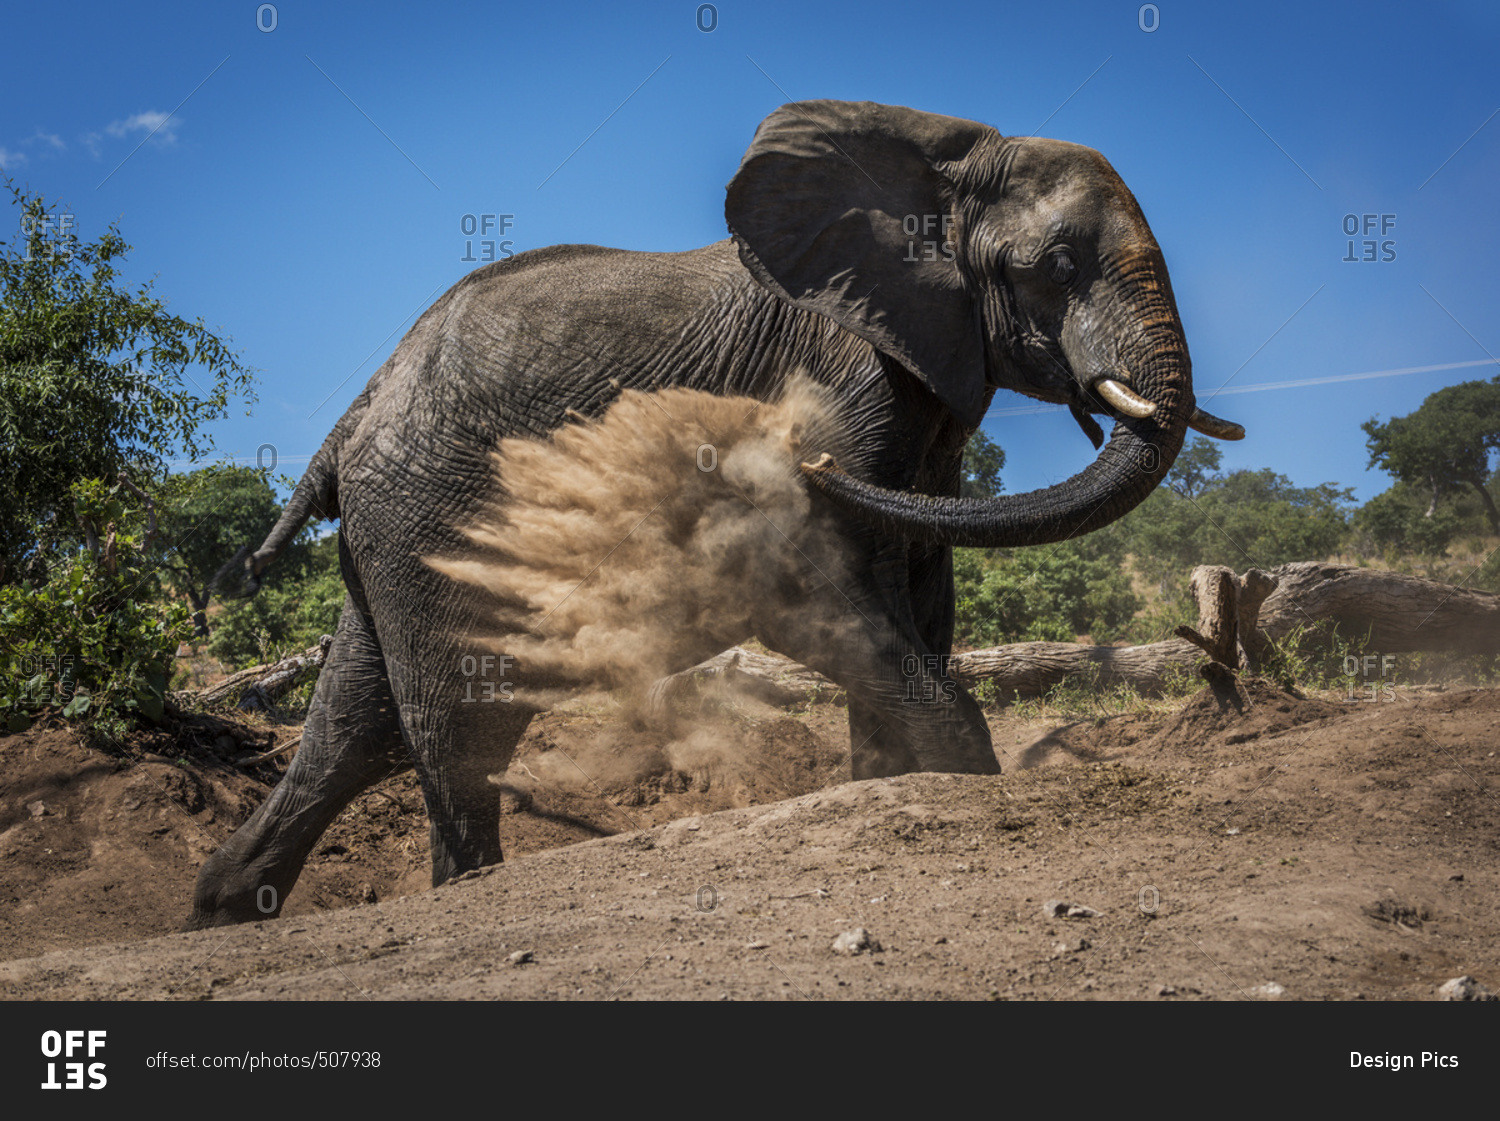 An elephant (Loxodonta Africana) is throwing dust over itself with it's trunk on a bare earth slope with trees in the background under a blue sky; Botswana